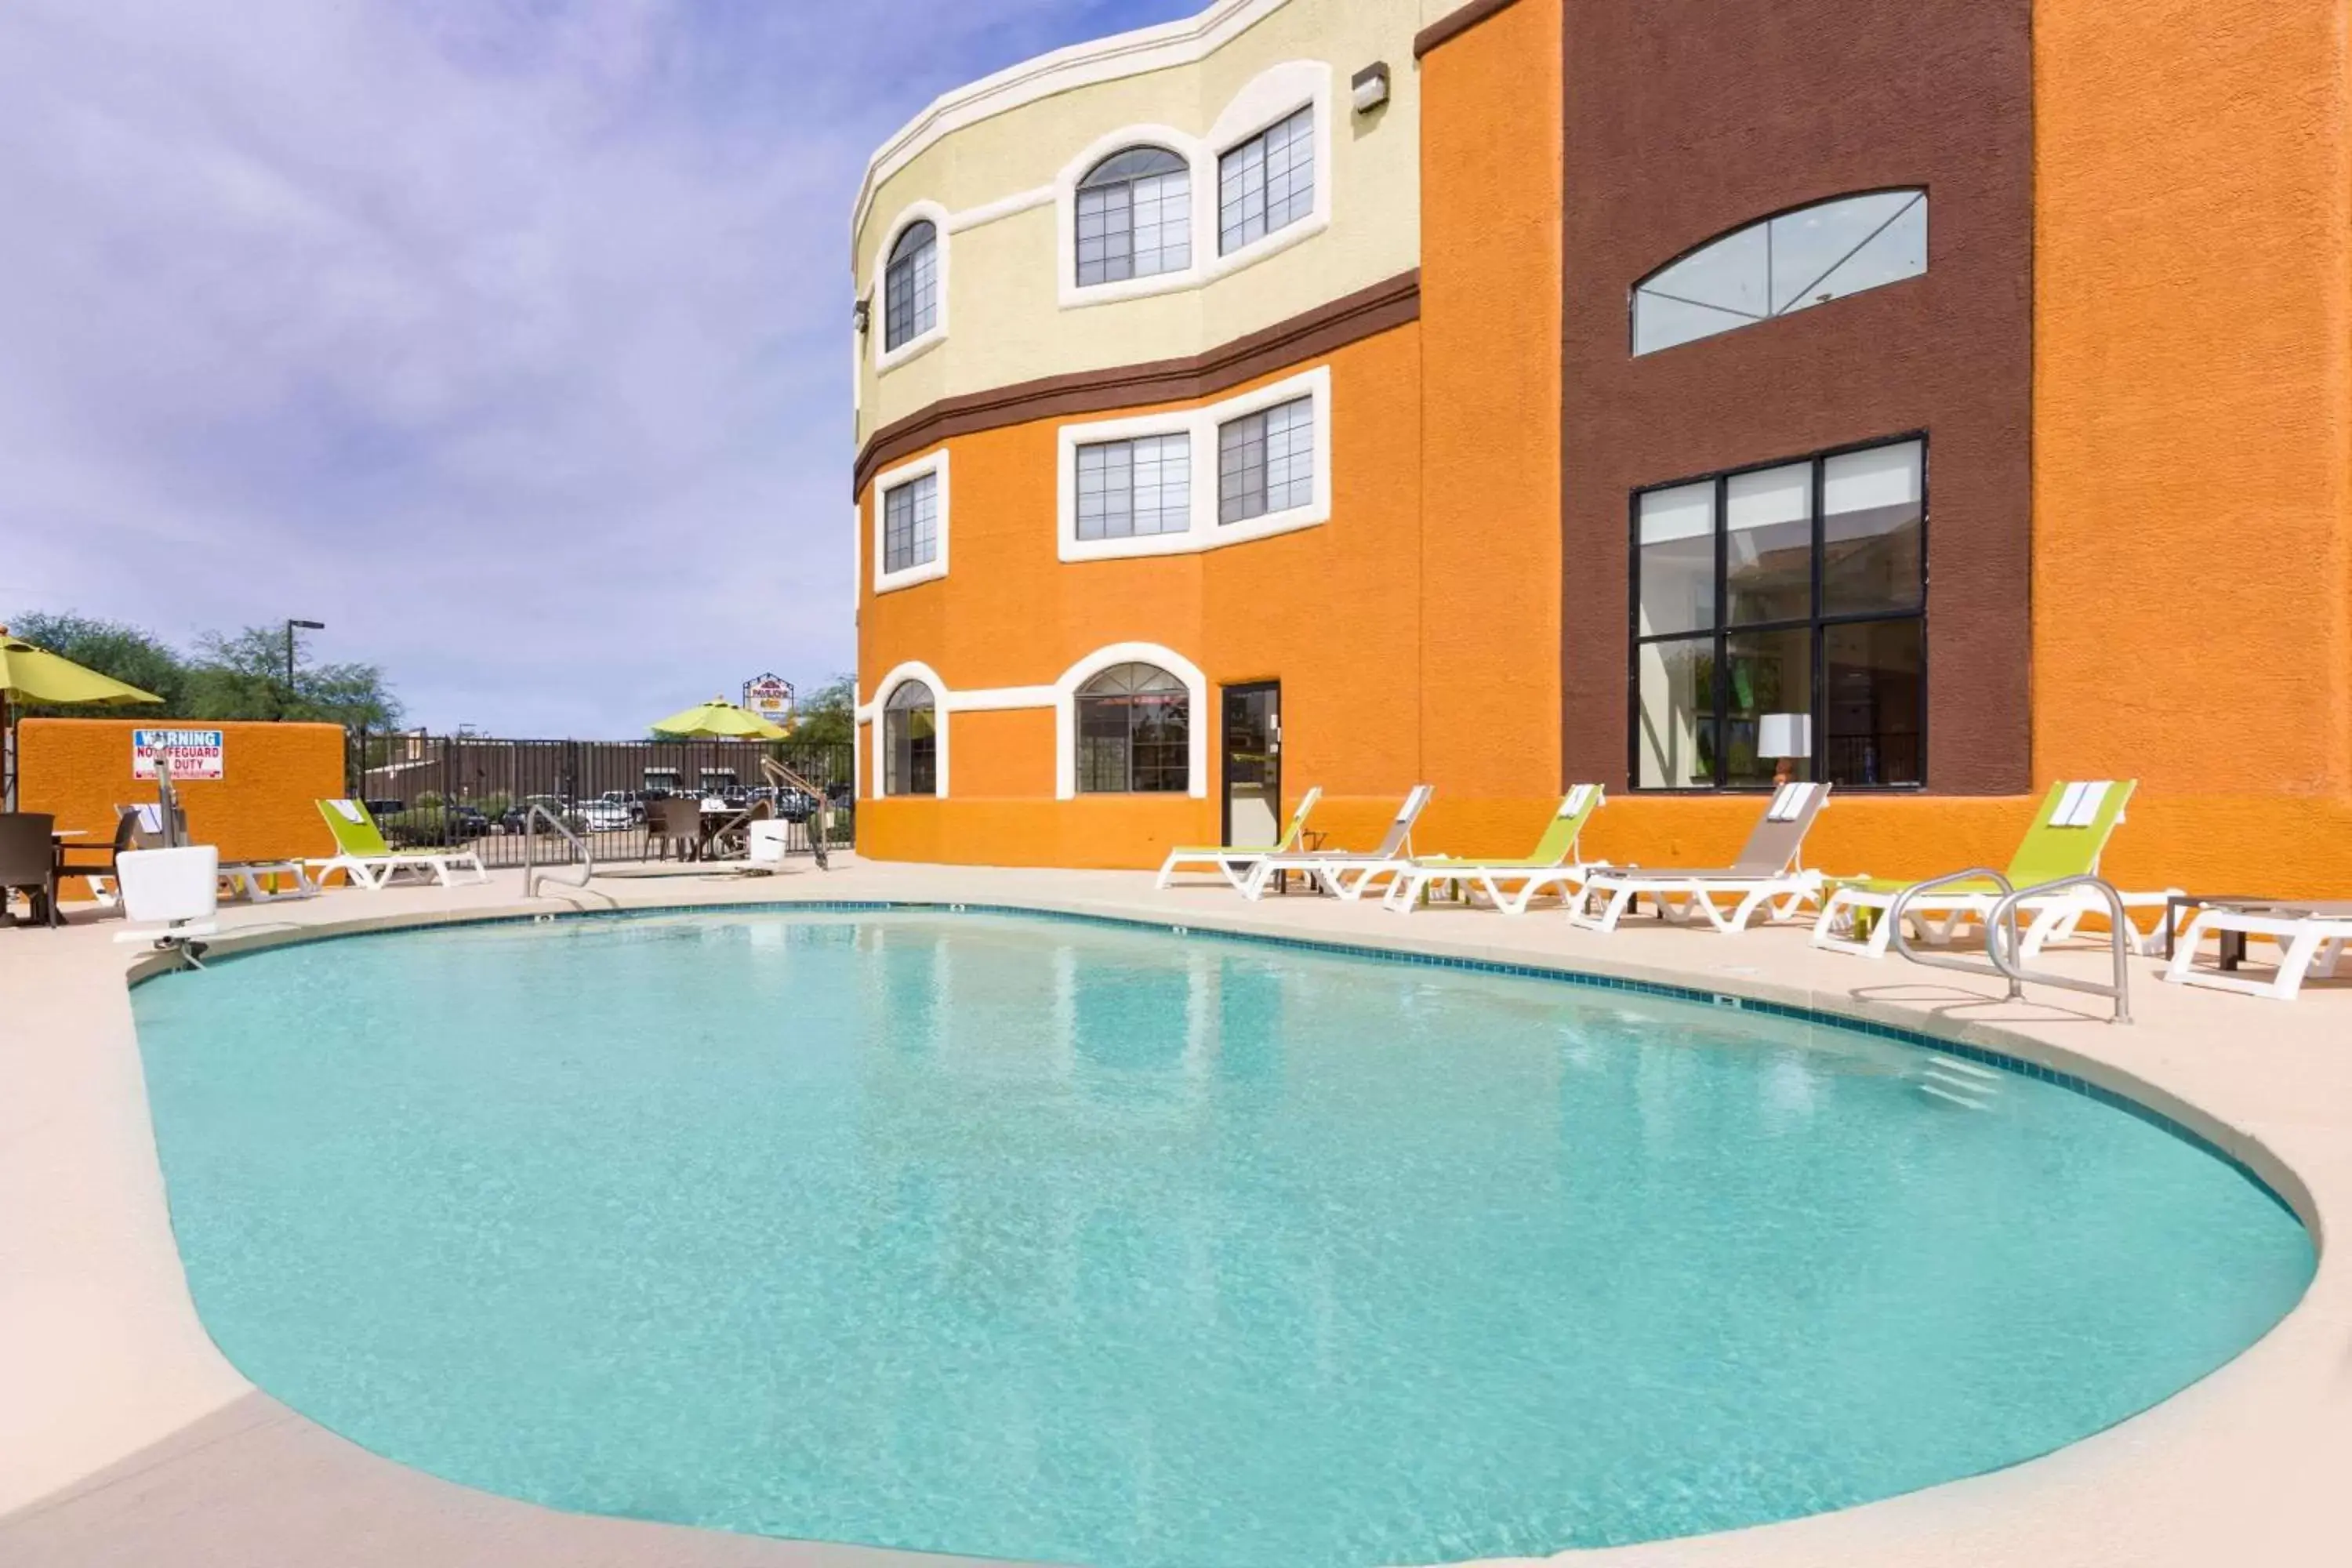 Activities, Property Building in Days Inn & Suites by Wyndham Tucson/Marana